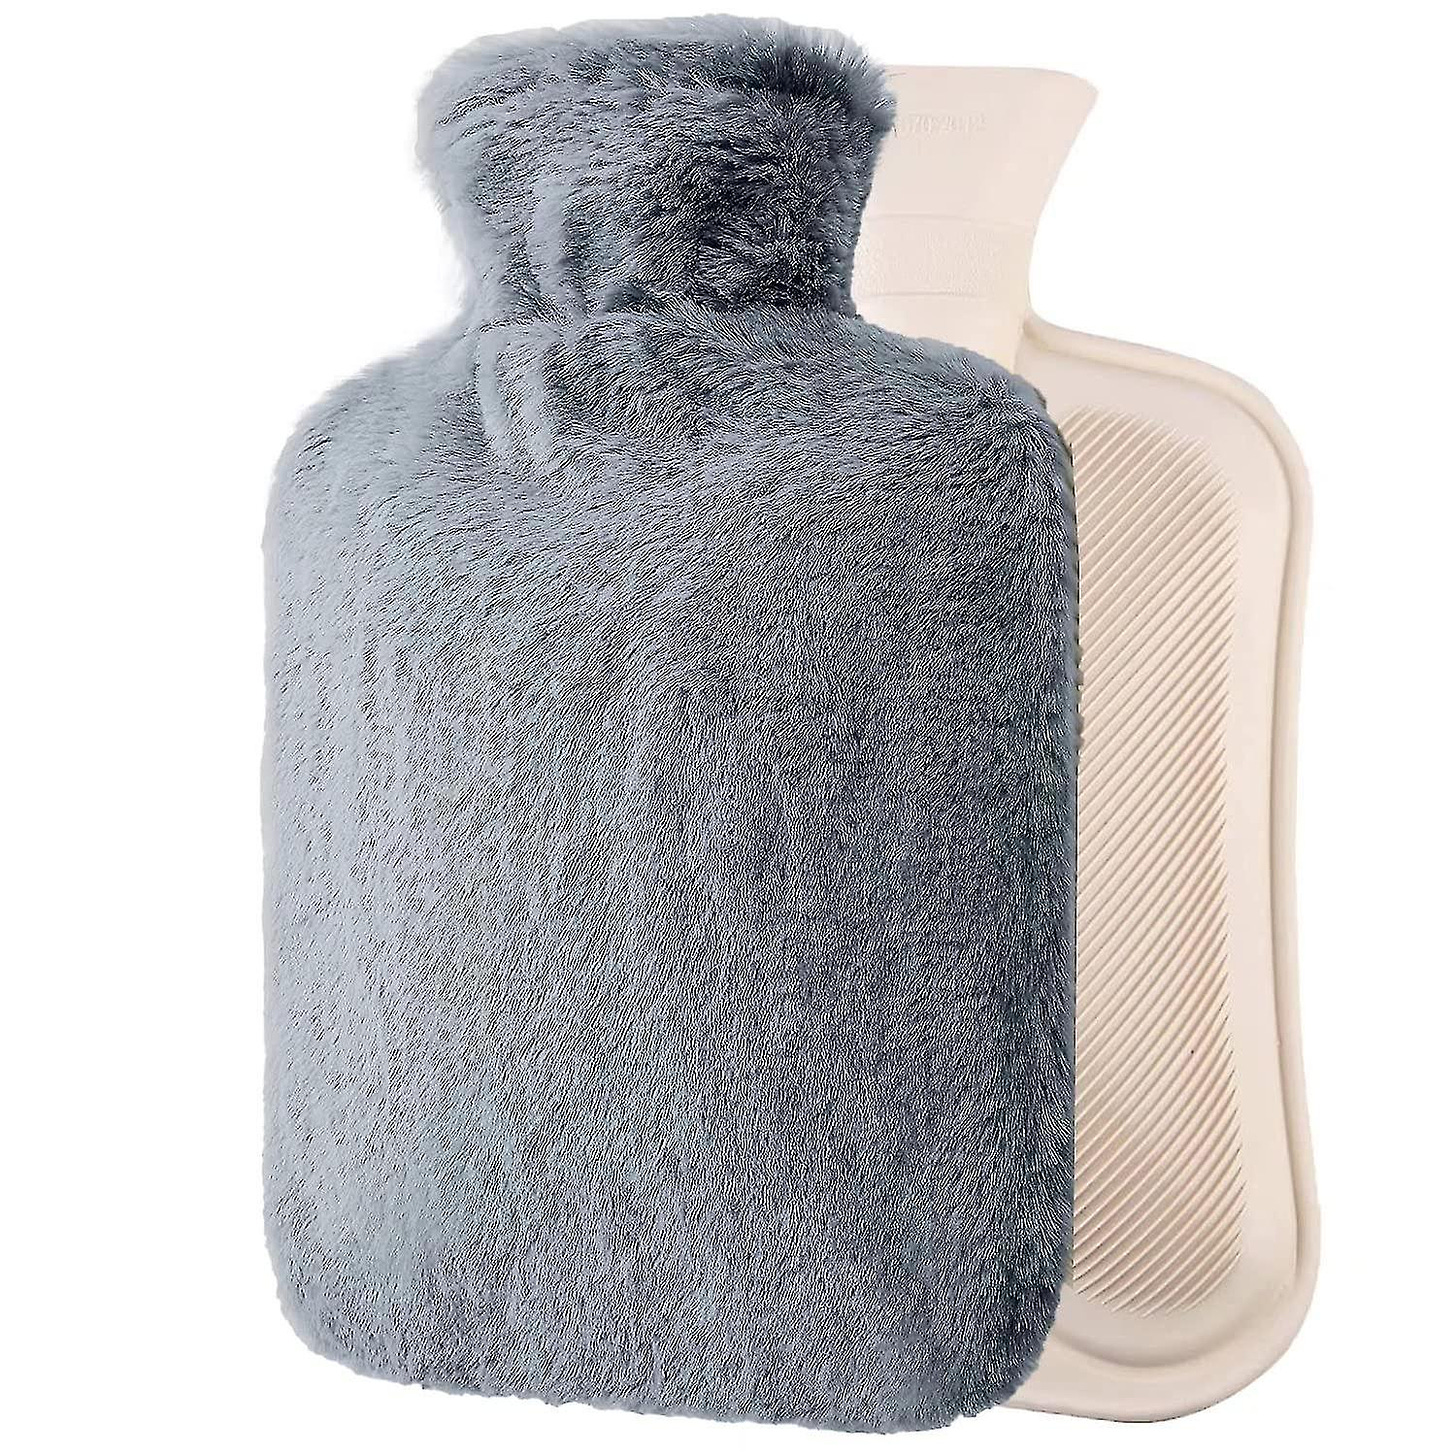 Hot Water Bottle With Fluffy Cover-soft Luxury, 1.8l Large Hot Water Bottle  As Great Gift For Women And Men, Warm Hot Water Bag